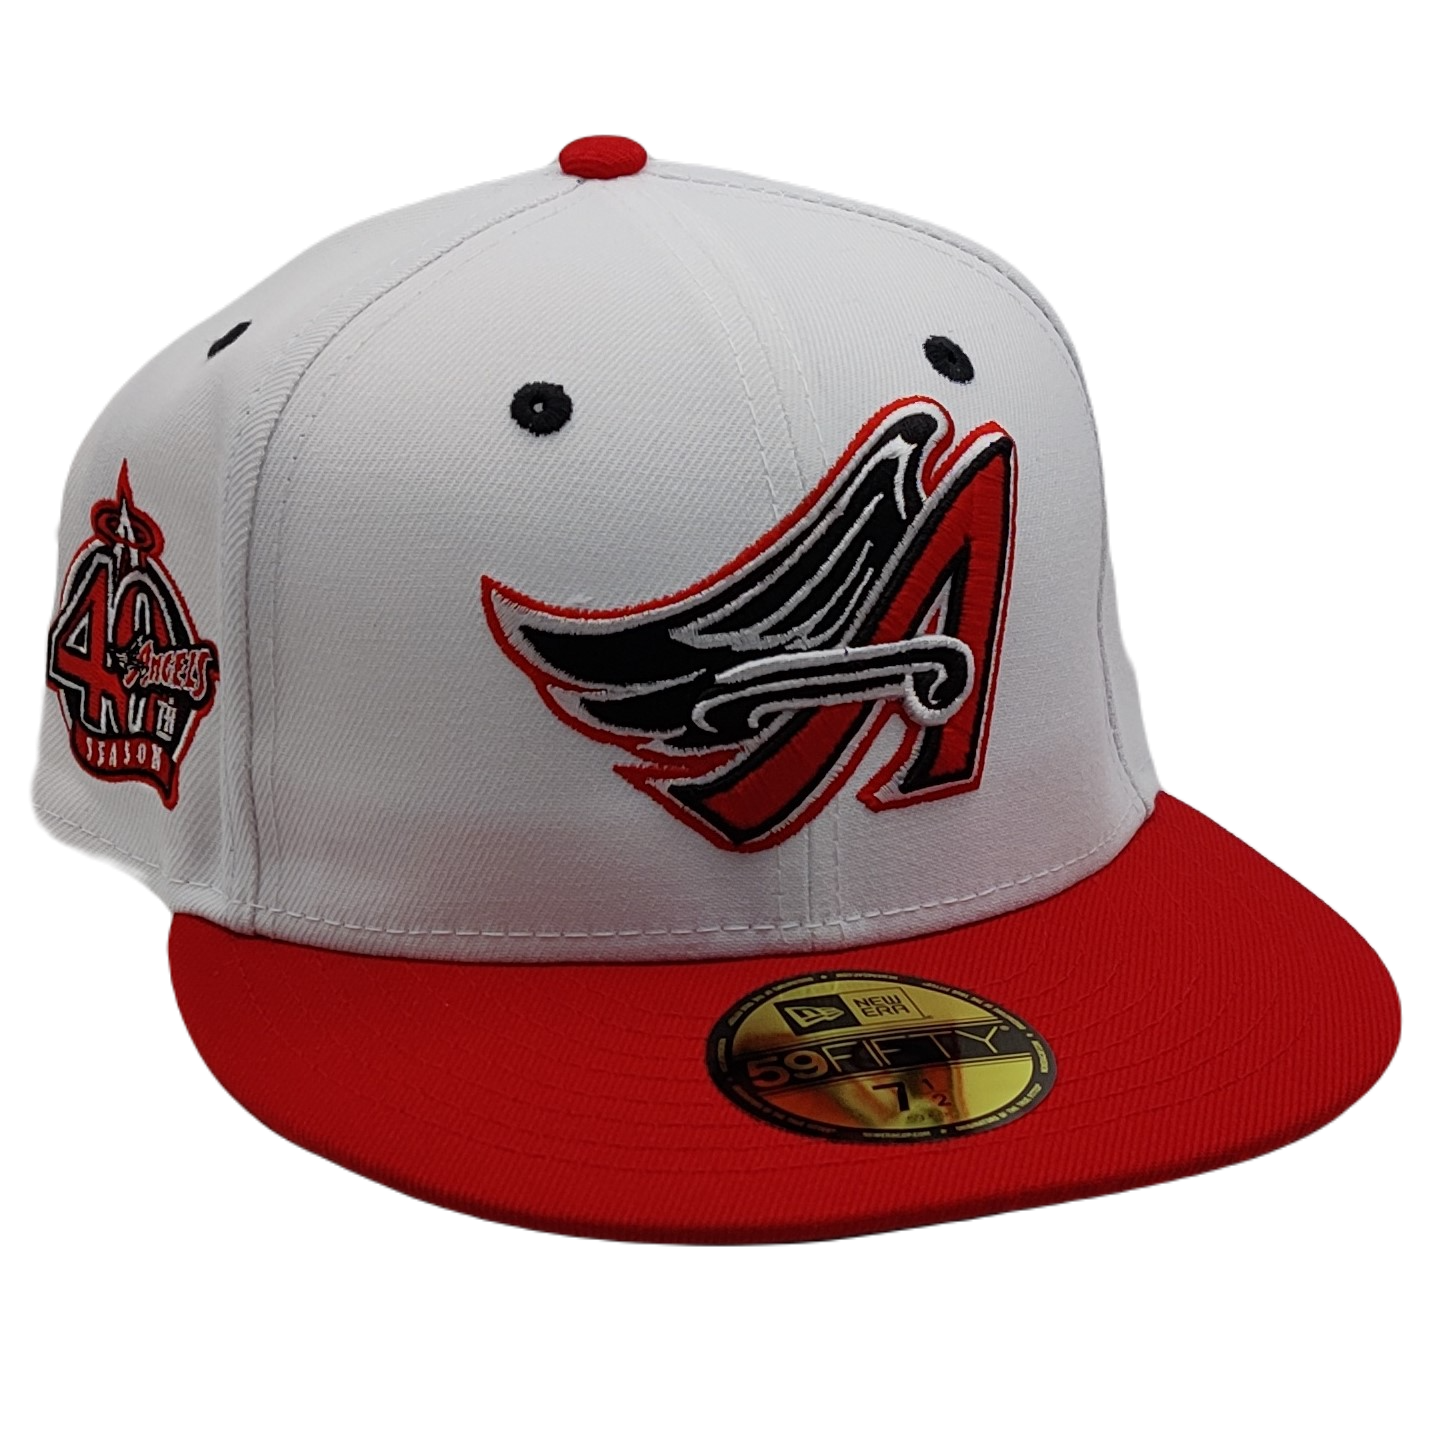 New Era Anaheim Angels 40th Anniversary Pinstripe Heroes Elite Edition  59Fifty Fitted Hat